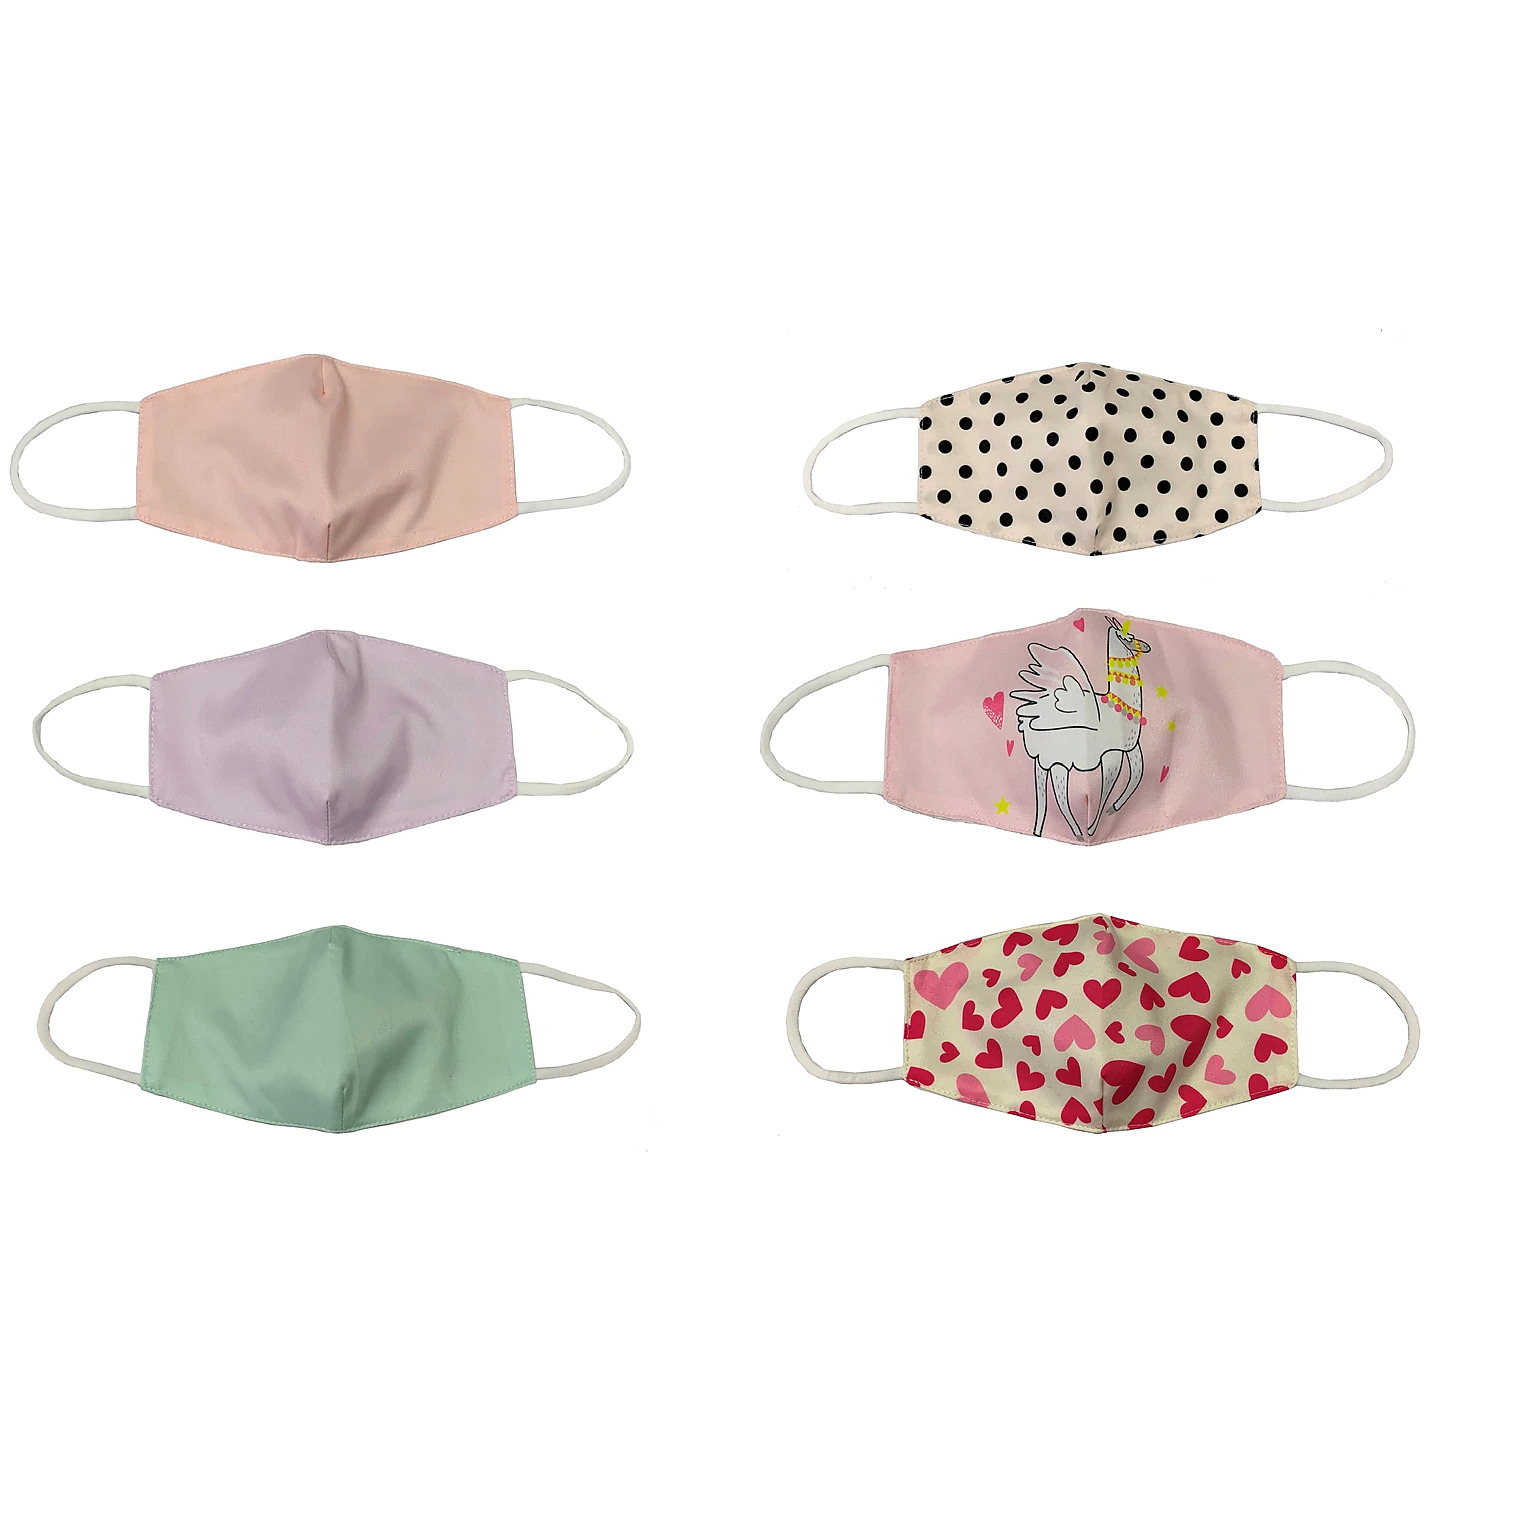 ORLY Reusable Cloth Face Masks for Kids, Elastic Strap, Pastel Colors, Assorted Designs, 24/Pack $14.11